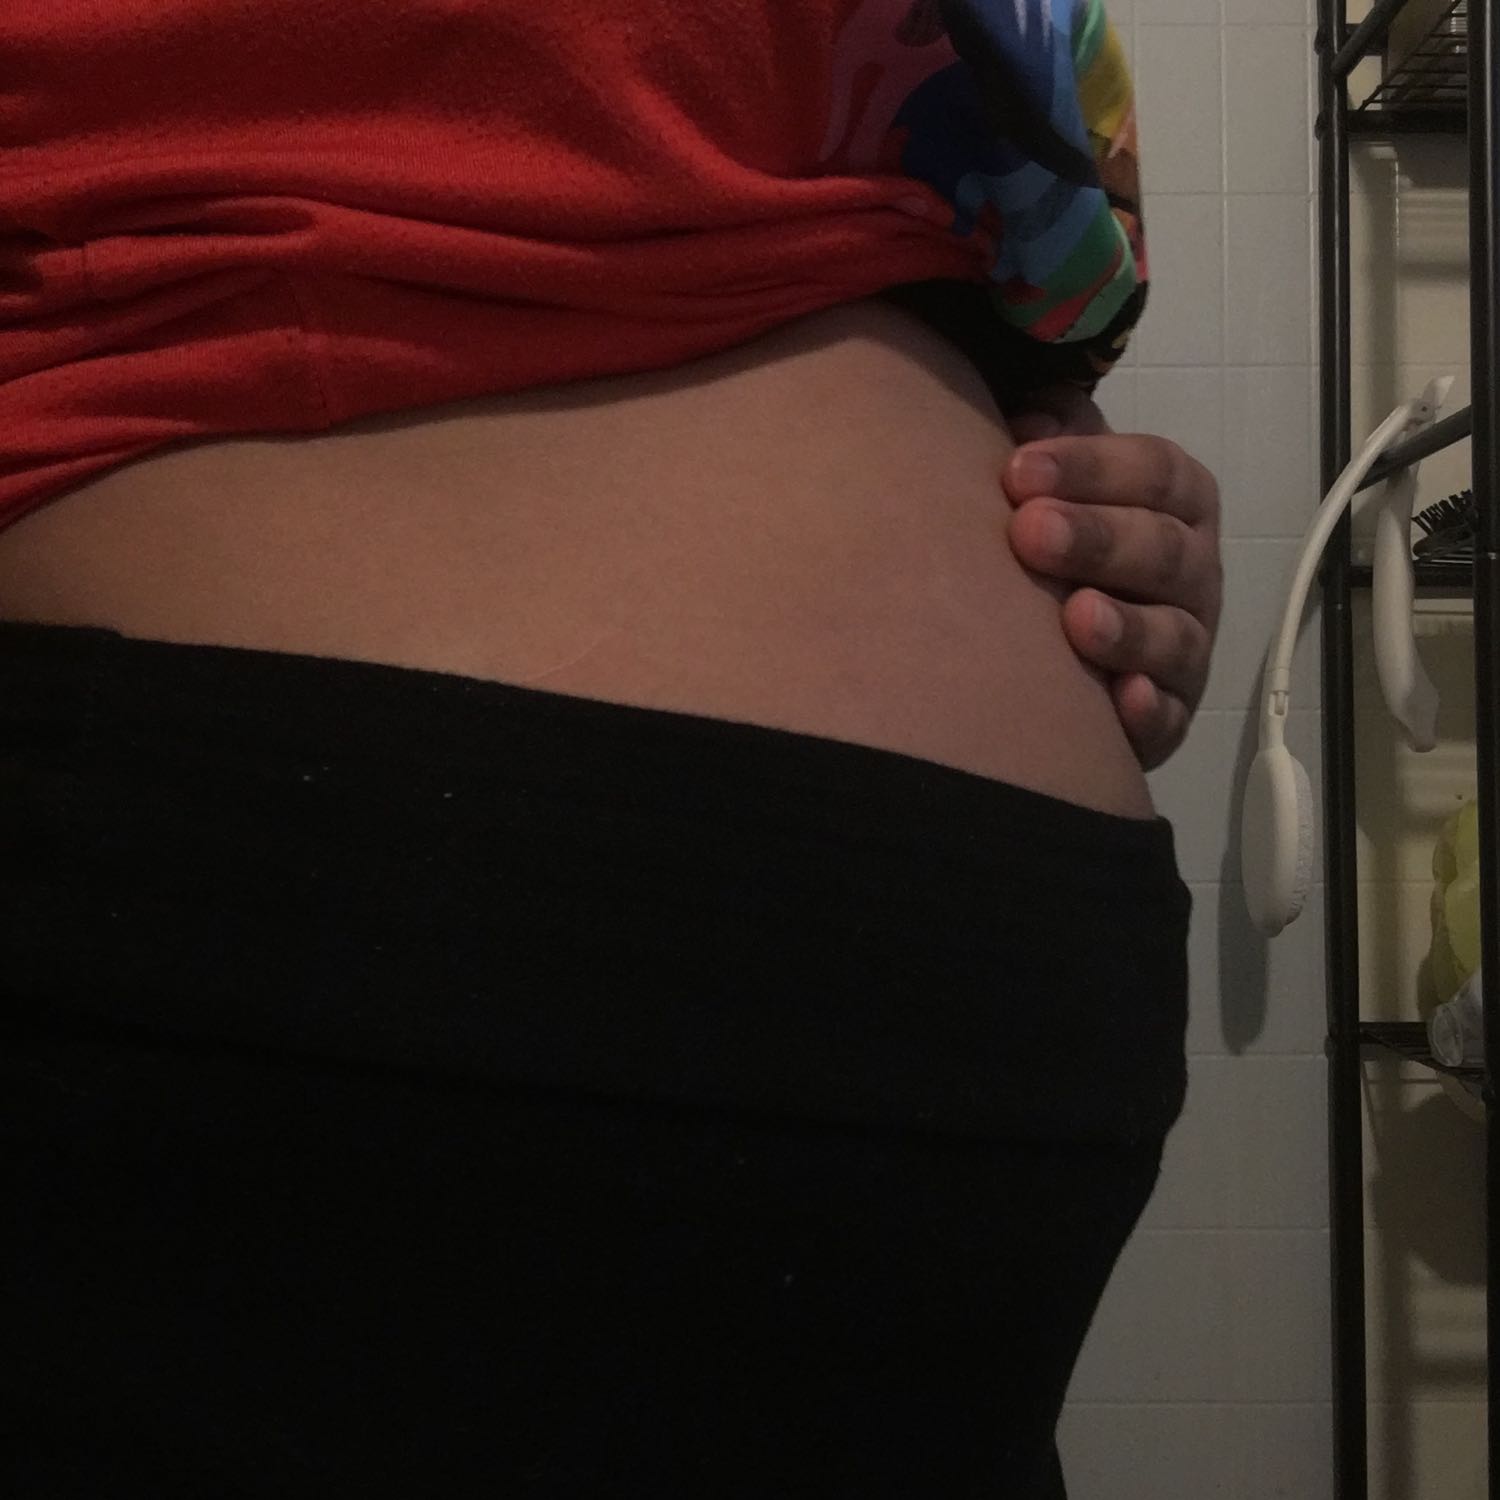 Hi I am 40 weeks pregnant and I have a question for you 